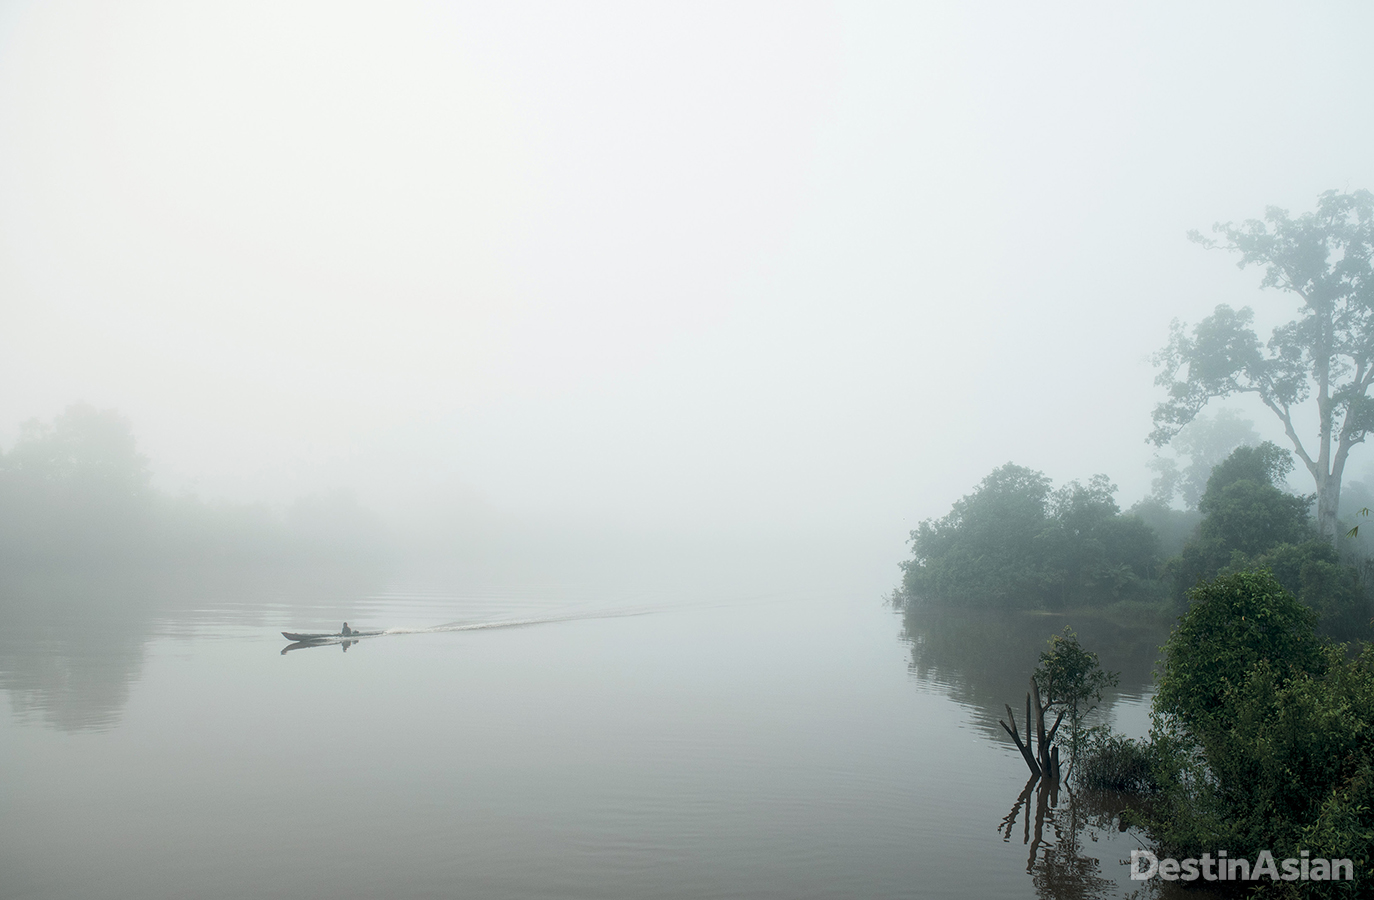 The early fog lifts slowly off the waters of the Rungan River in Central Kalimantan.